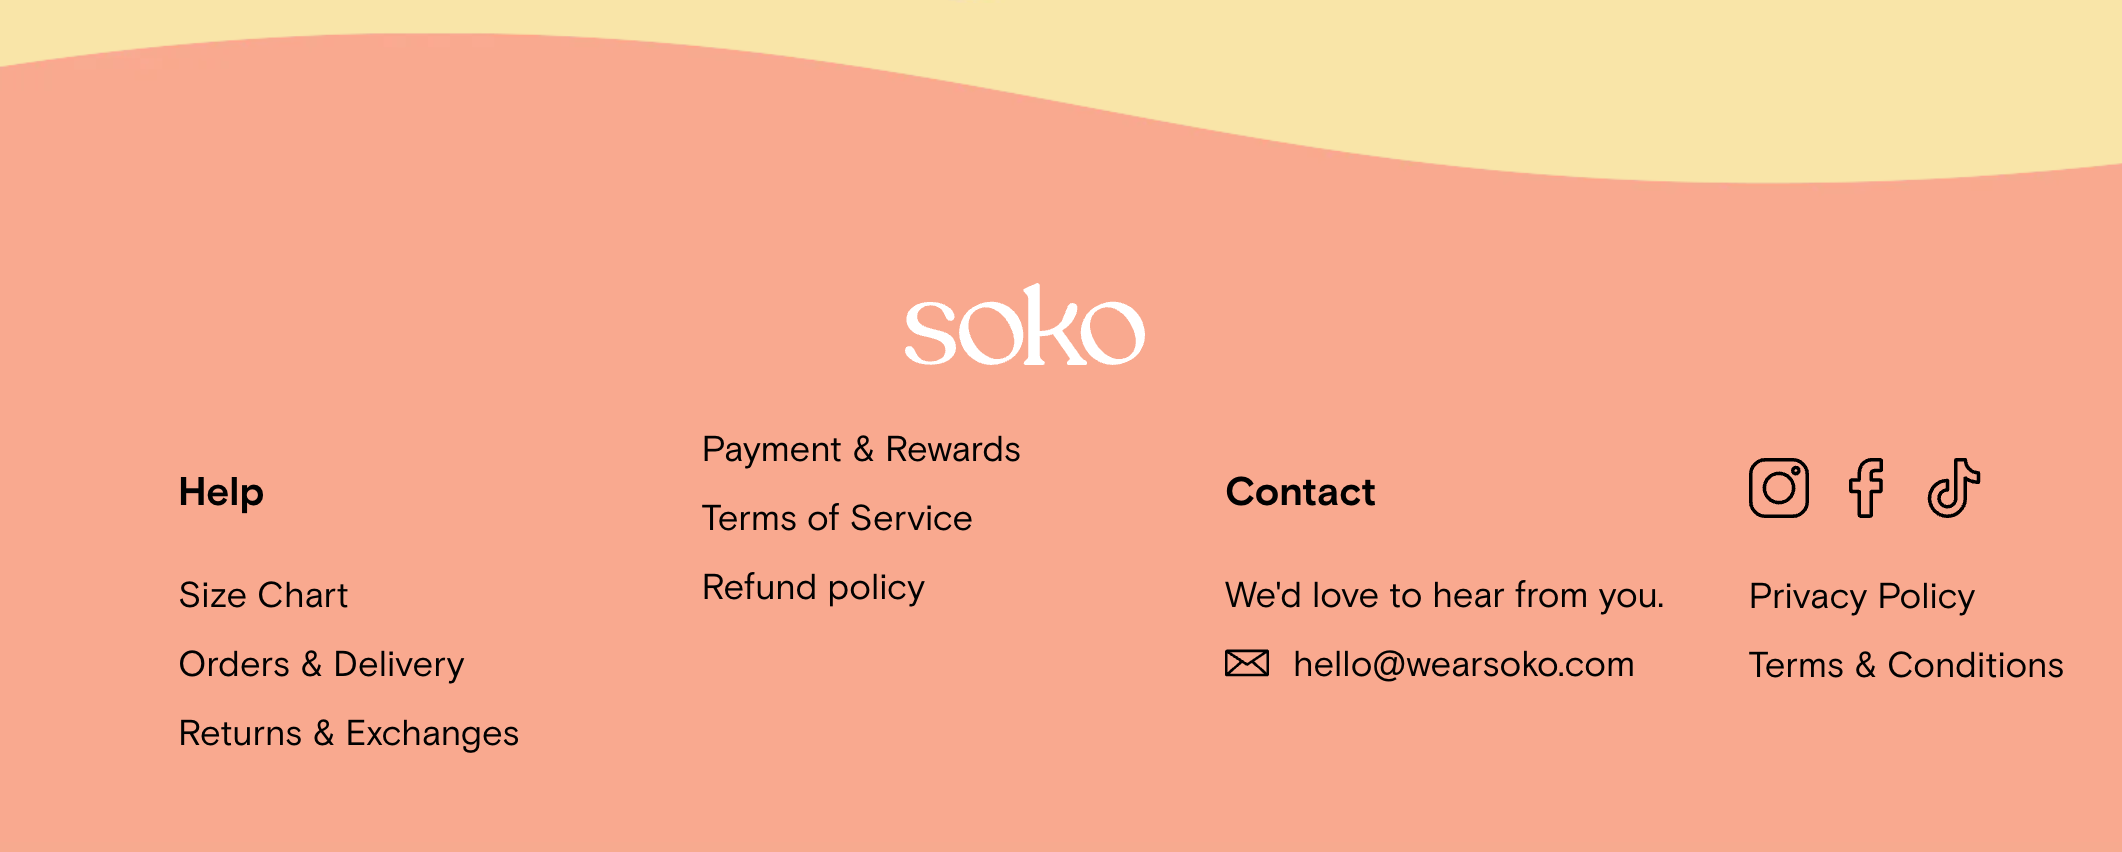 Ecommerce contact info in the footer of the website for Soko brand